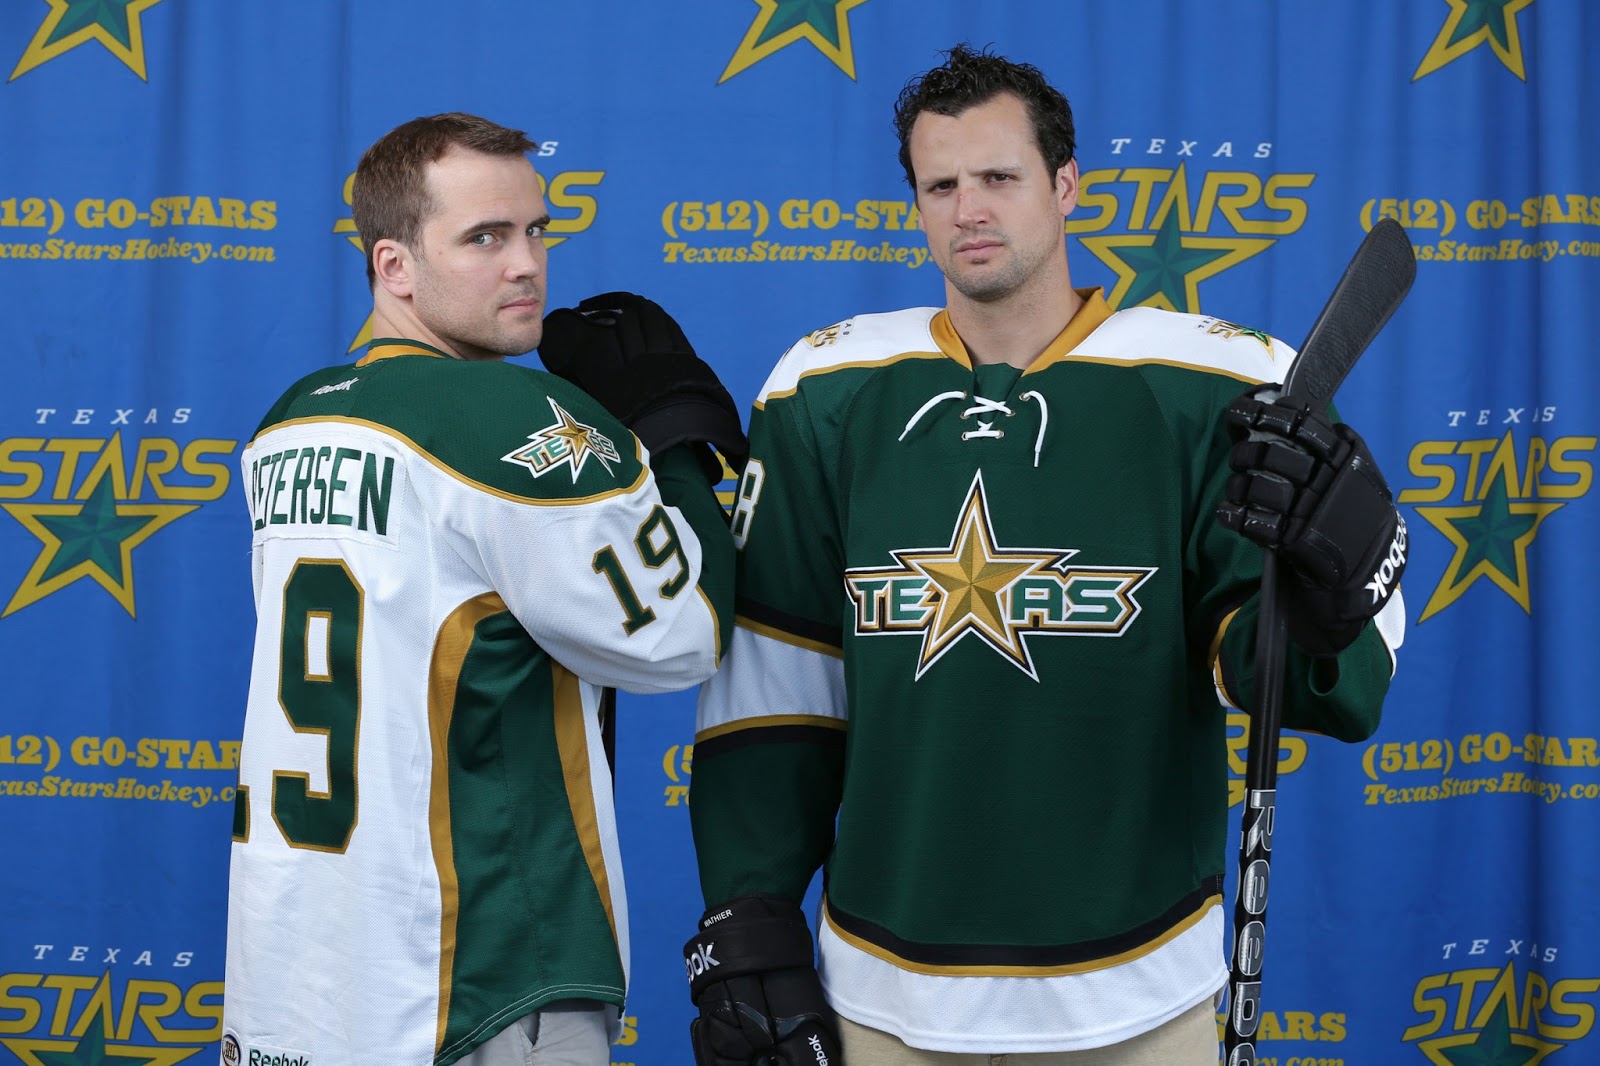 Texas Stars Reveal New Look for Next Season, Including Green Road Jerseys